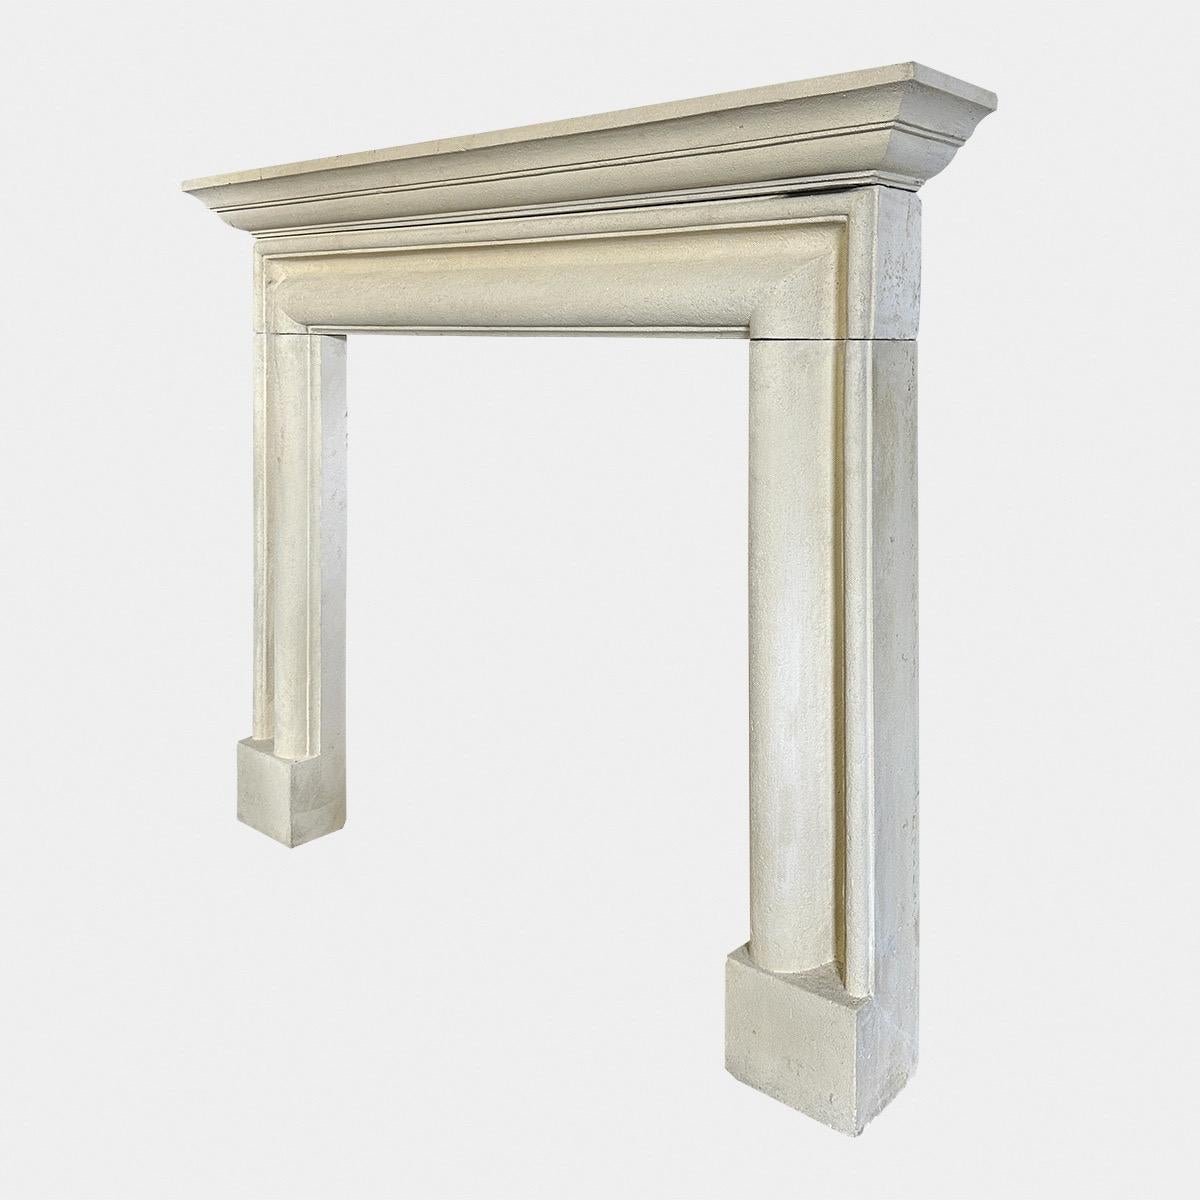 A reclaimed stone fireplace in the Georgian style, a bolection moulded frame with a stepped mantle shelf. Stood on square foot blocks, with a deep moulding. Reclaimed from a cottage in the Cotswolds.

English Late 20th century 

Opening Sizes

91cm